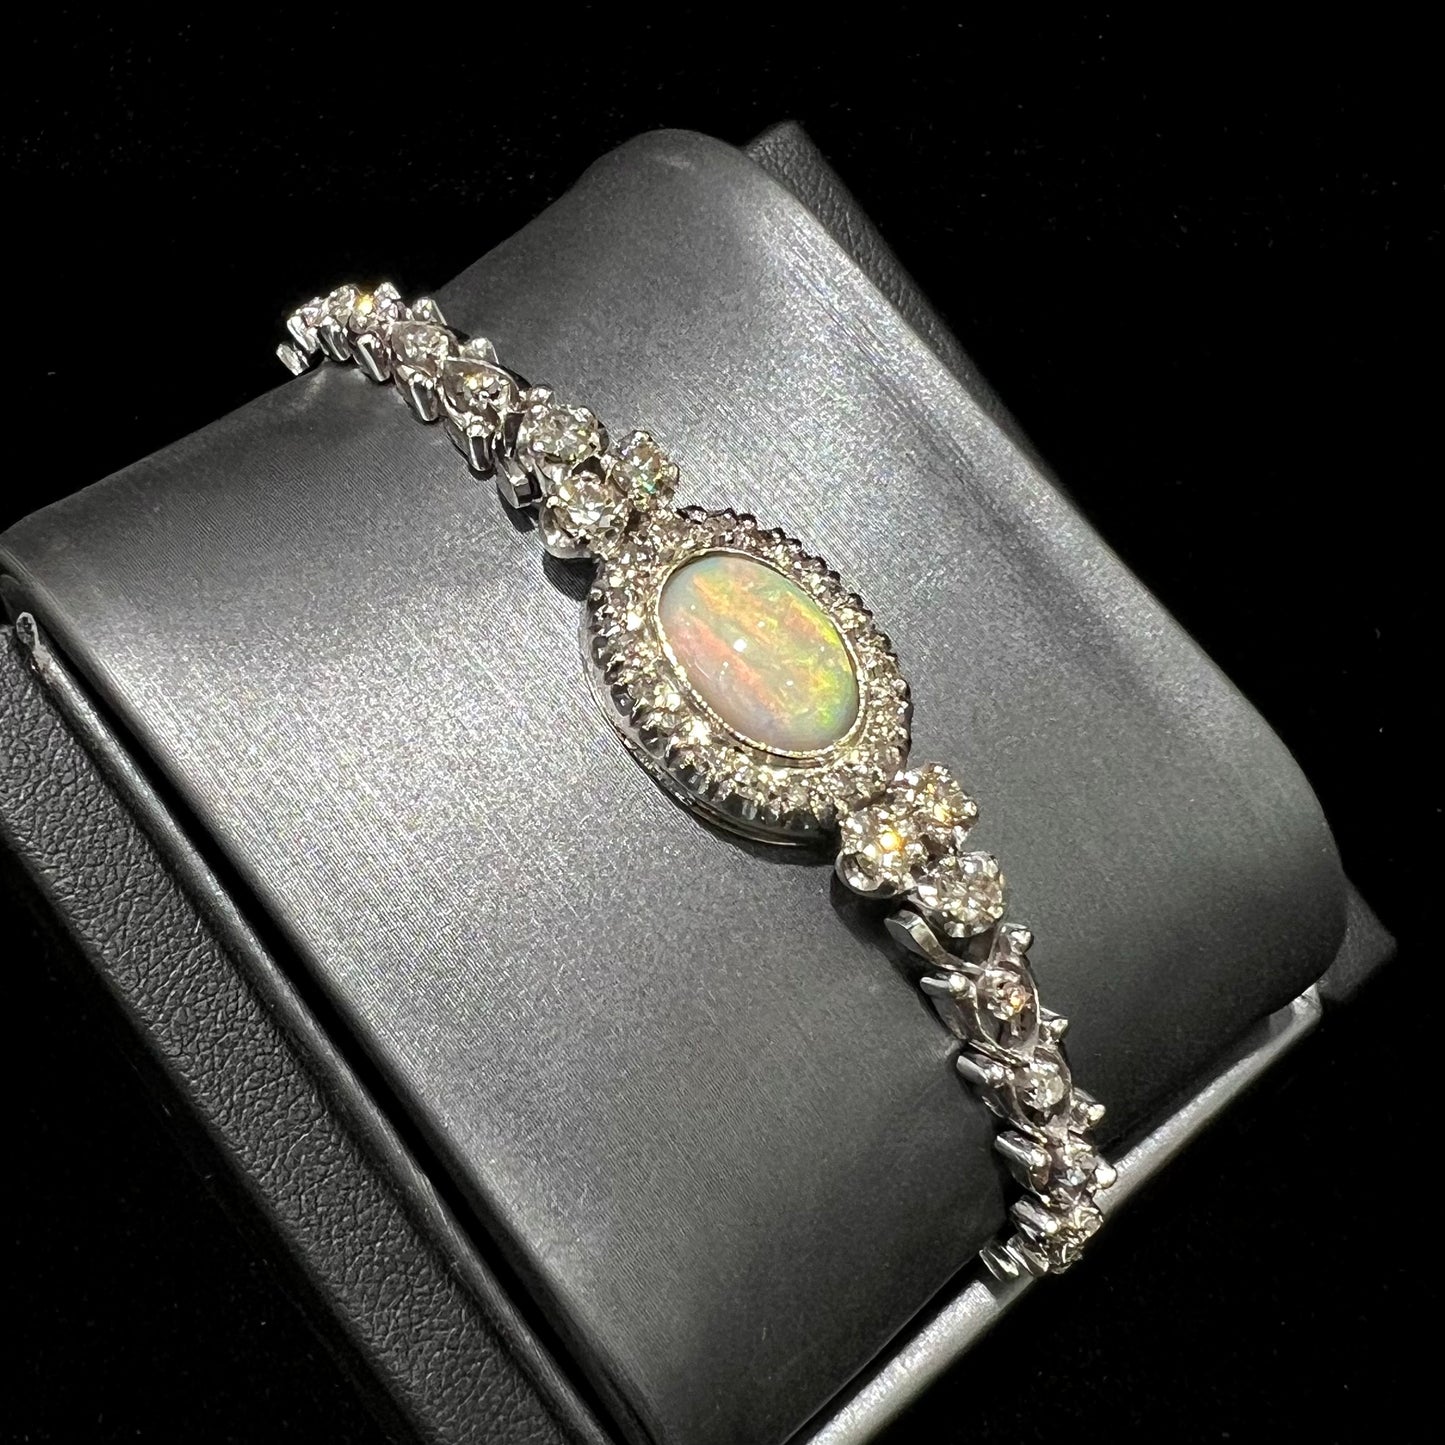 A ladies' vintage, 1930's natural opal bracelet set with accent diamonds in white gold.